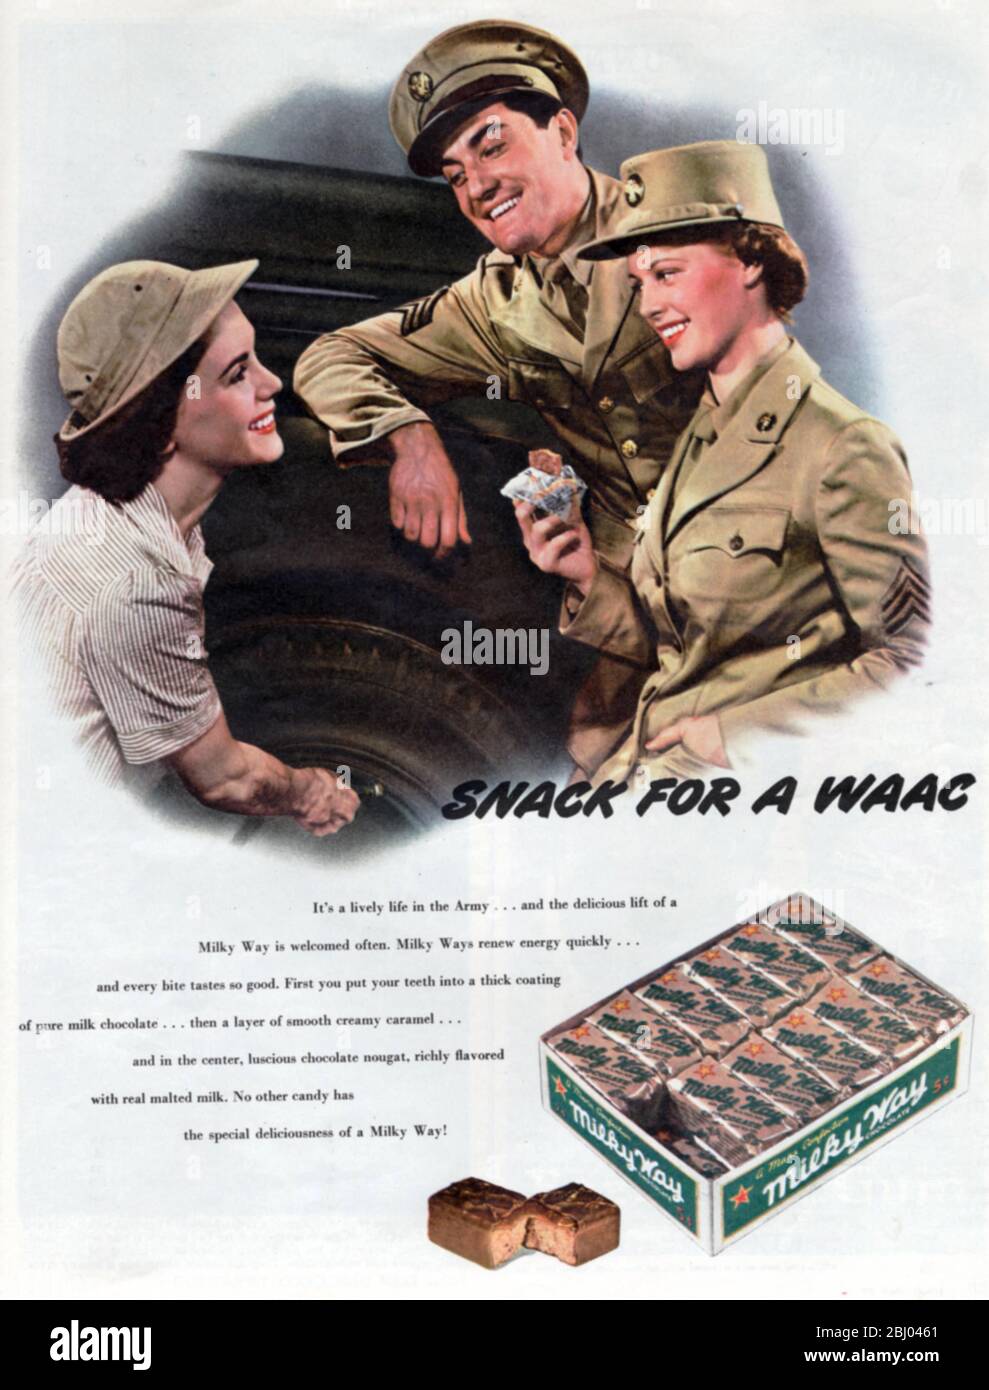 Look Magazine 22 February 1944 Advertising Milky Way Chocolate Bar snack for a WAAC Stock Photo